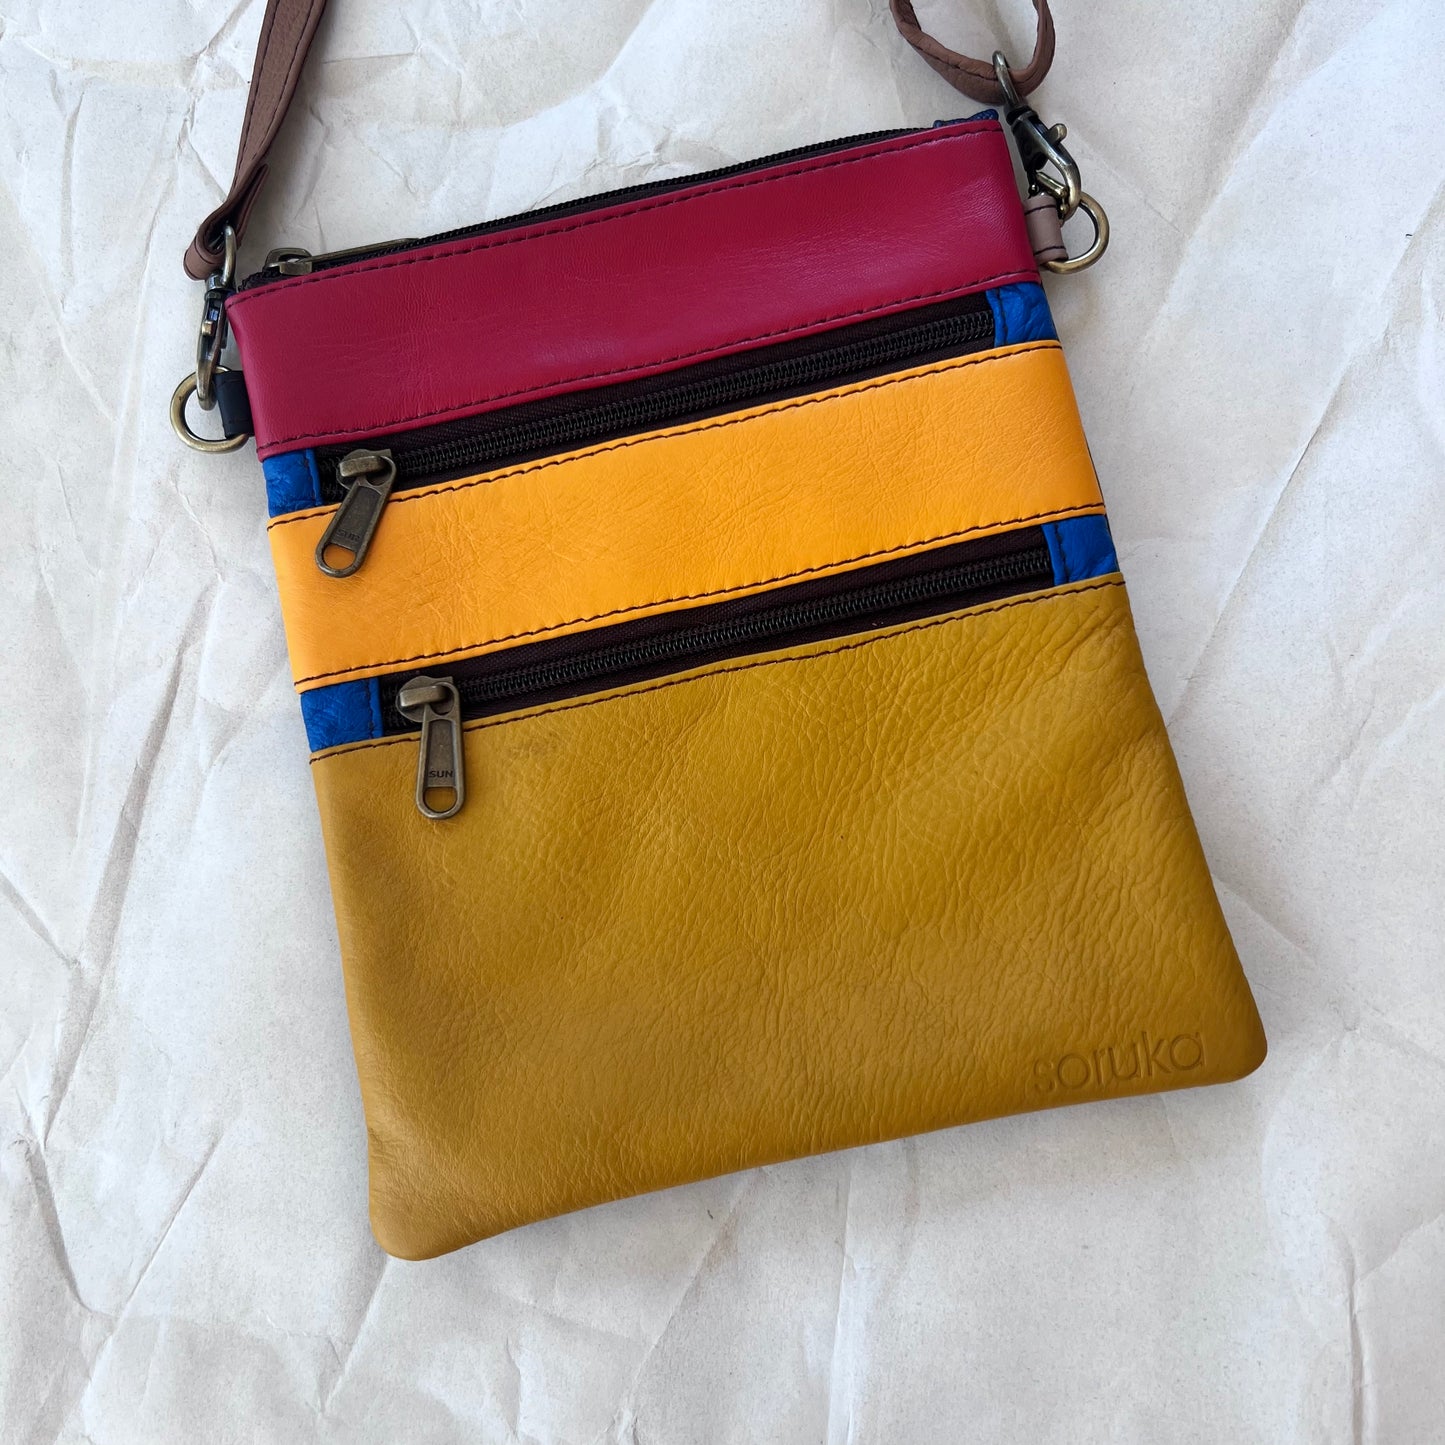 flat rectangular bag with top zipper and 2 zipper pockets color blocked in yellow and red.